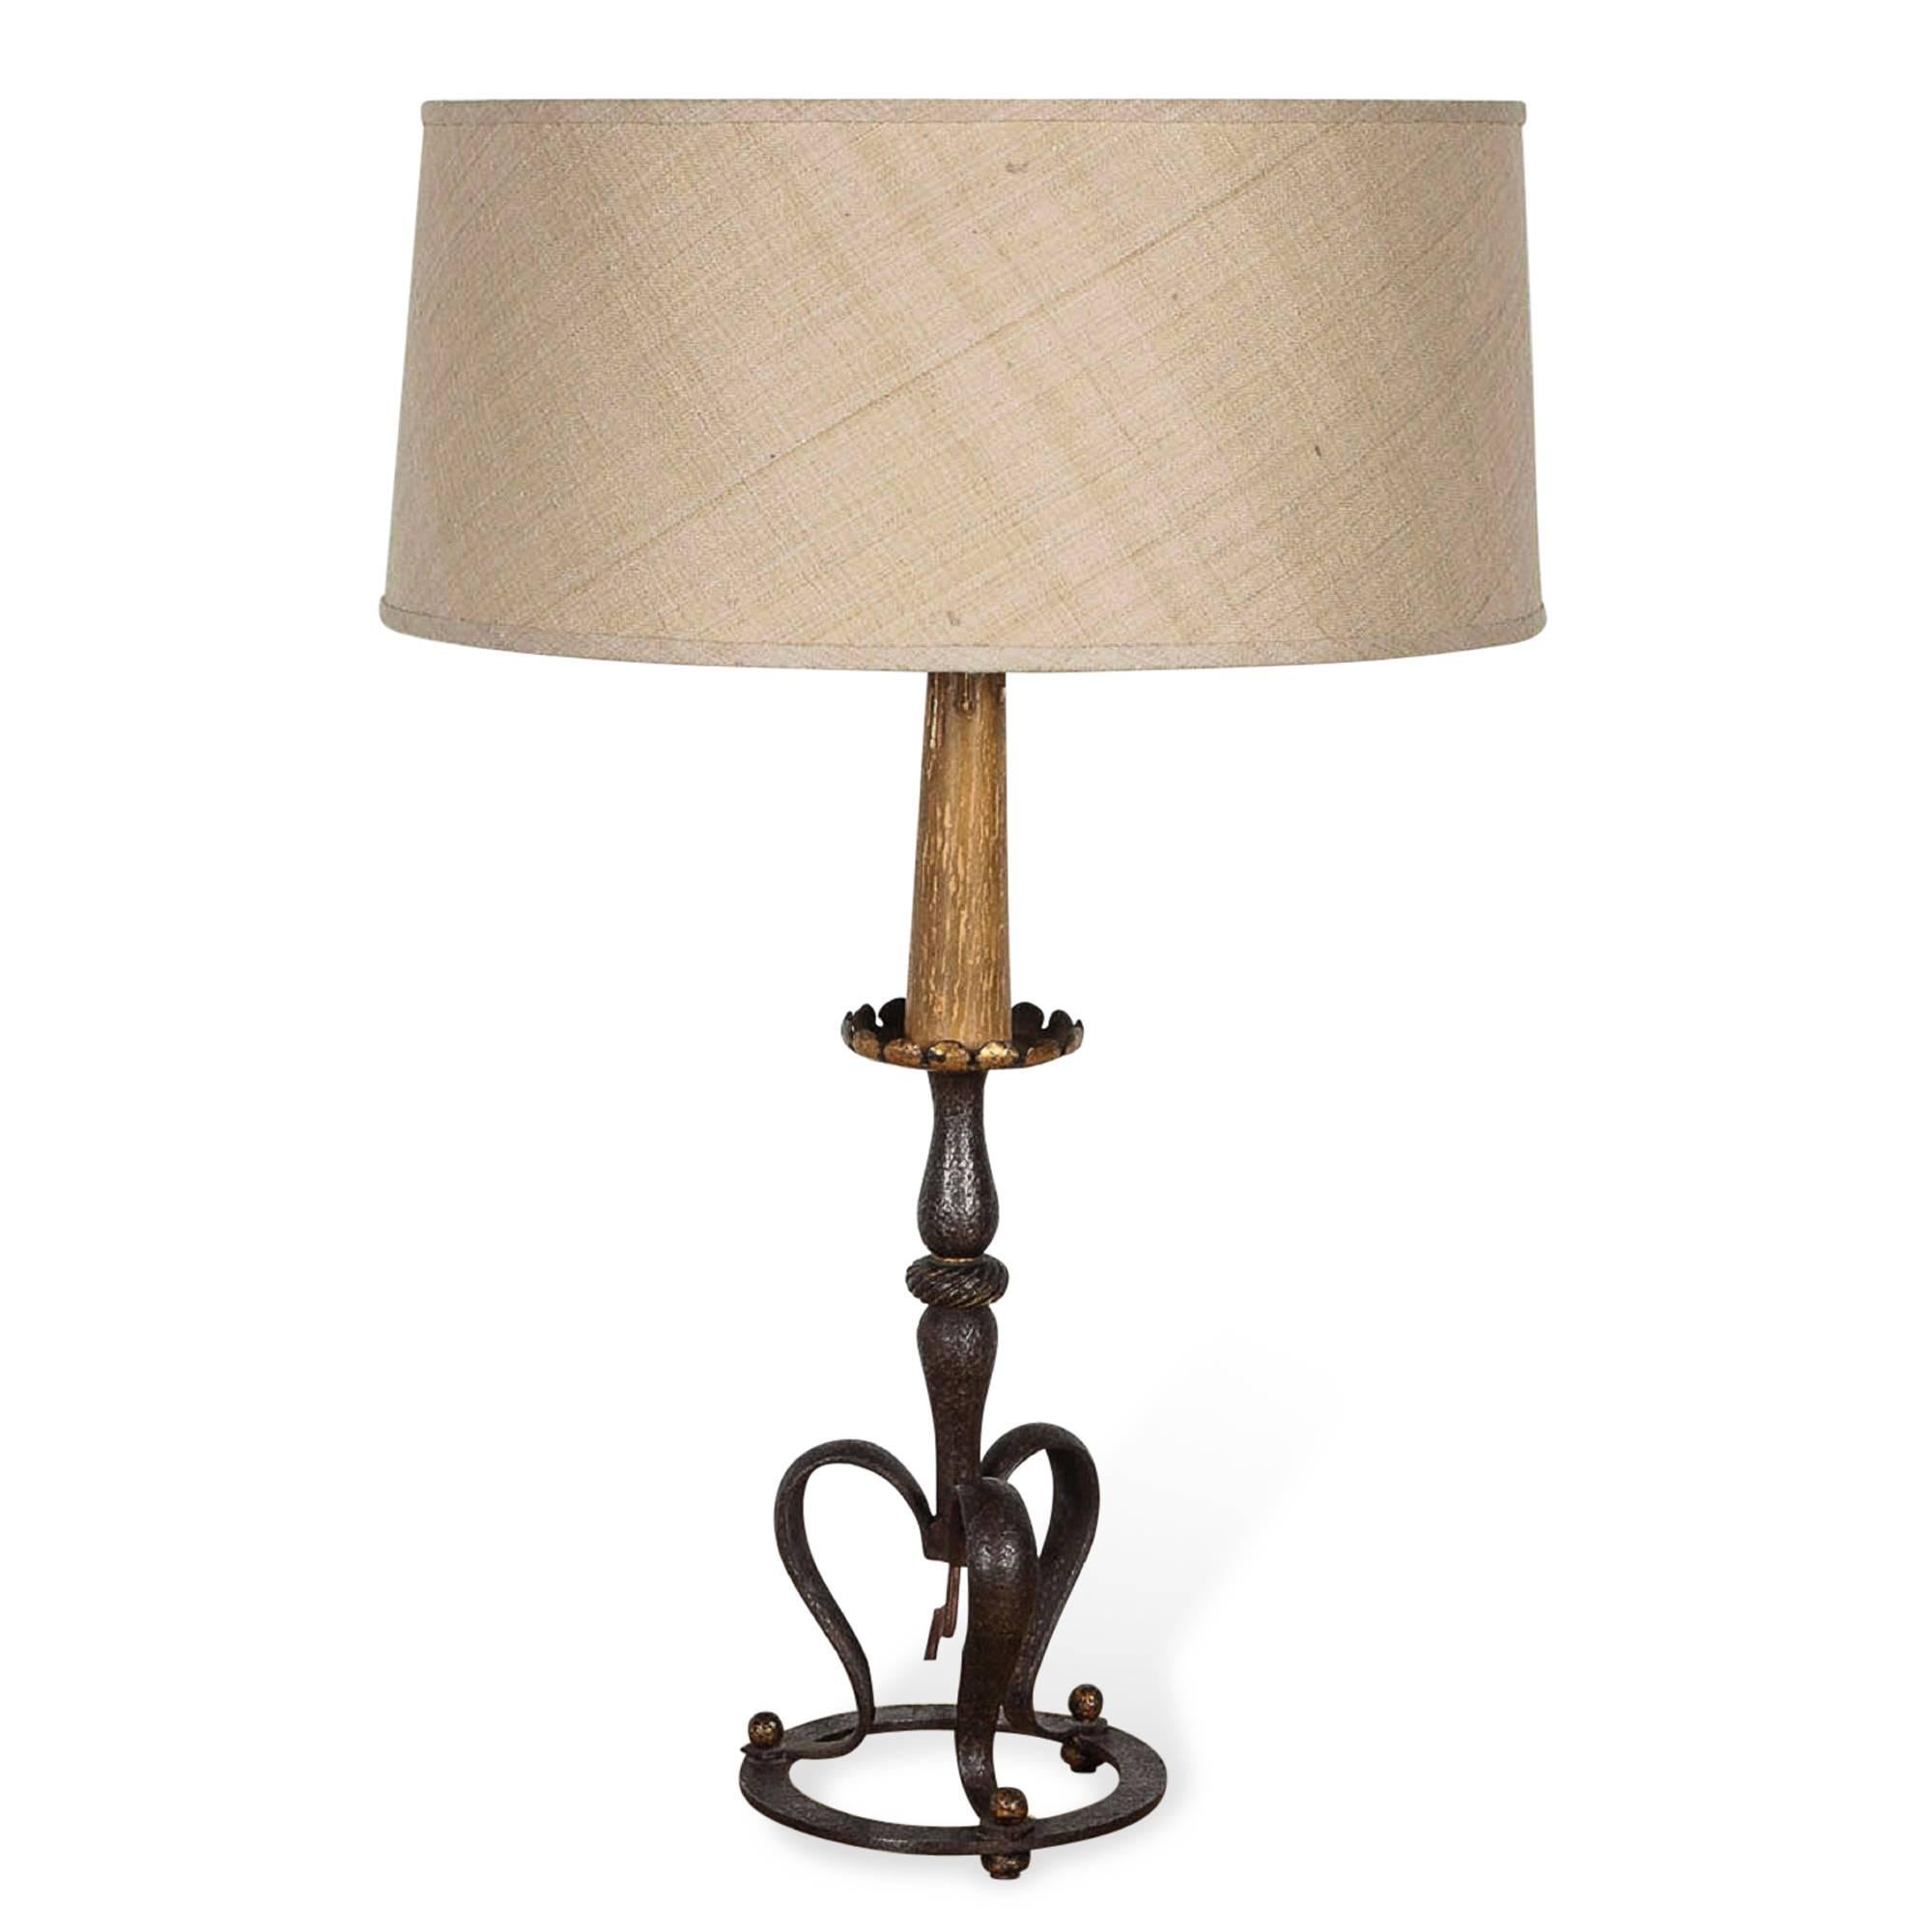 A wrought iron and gilt table lamp, candle style with three leg base, by Gilbert Poillerat, French, late 1930s. In custom shade. Measures: Diameter of base is 6 3/8 inches. Overall height 24 in. Diameter of shade 16 in.
    